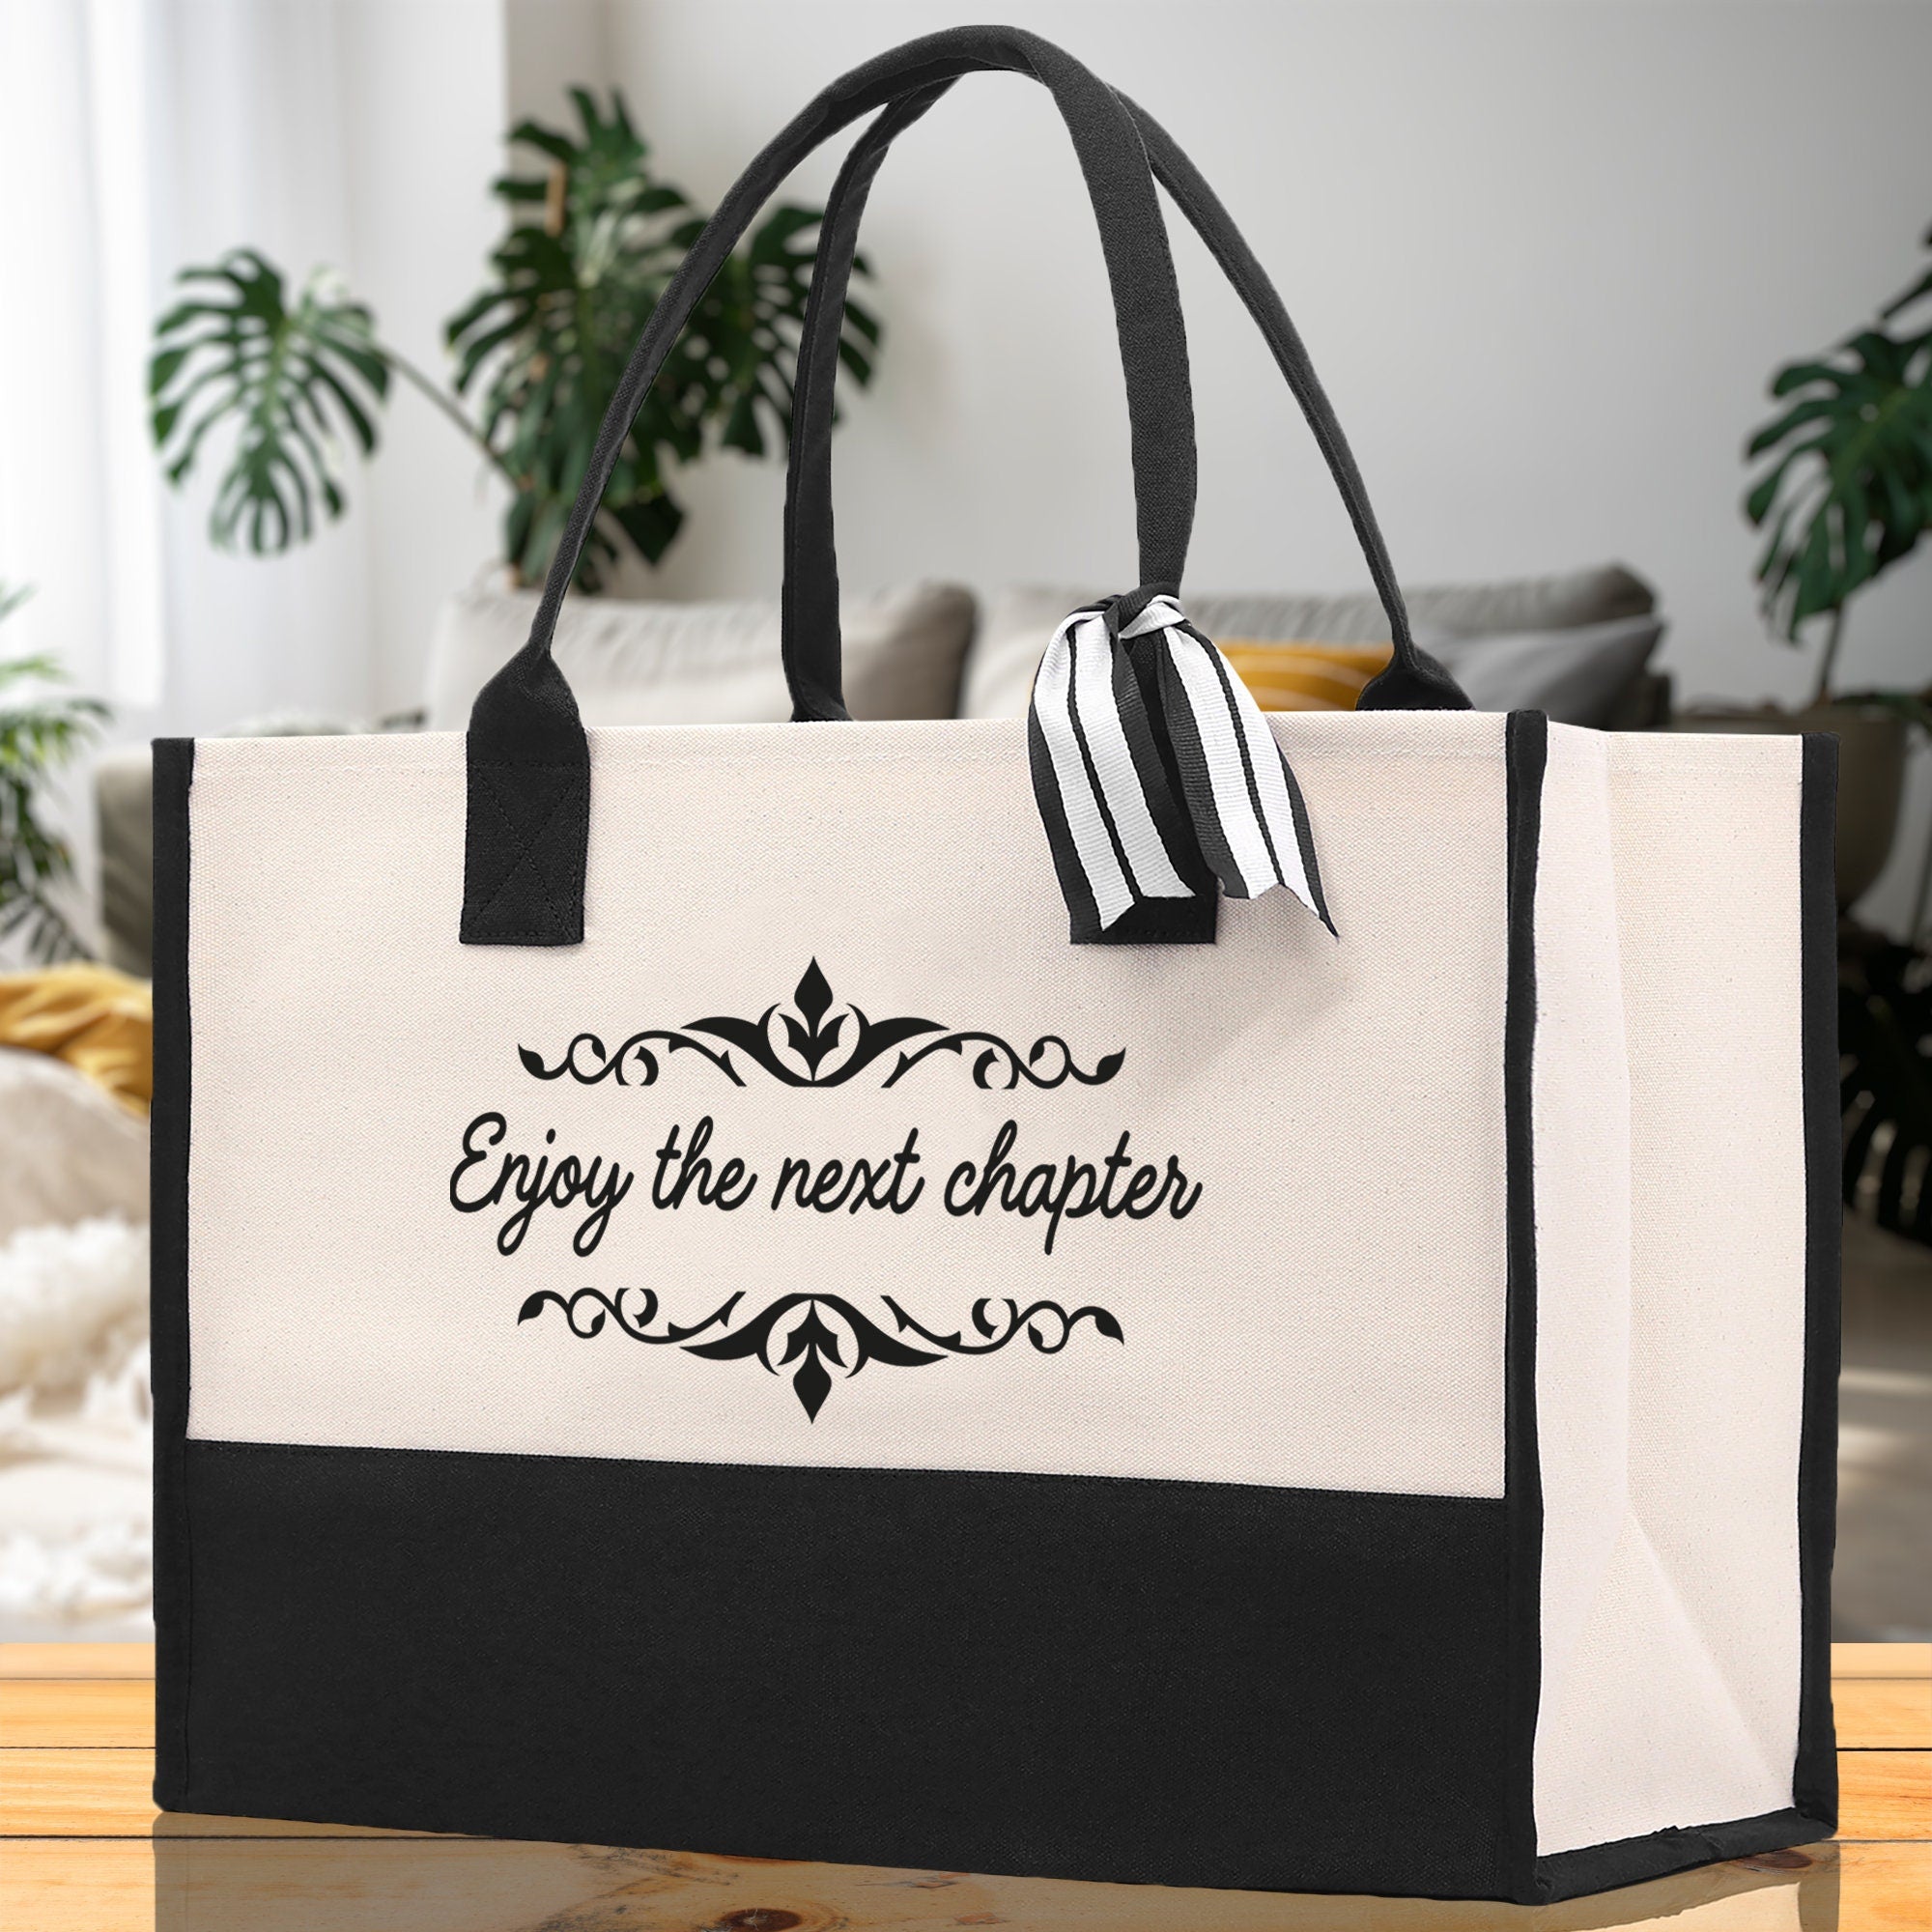 Enjoy The Next Chapter Canvas Tote Bag Birthday Gift for Her Weekender Tote Bag Beach Tote Bag Large Beach Tote Bag